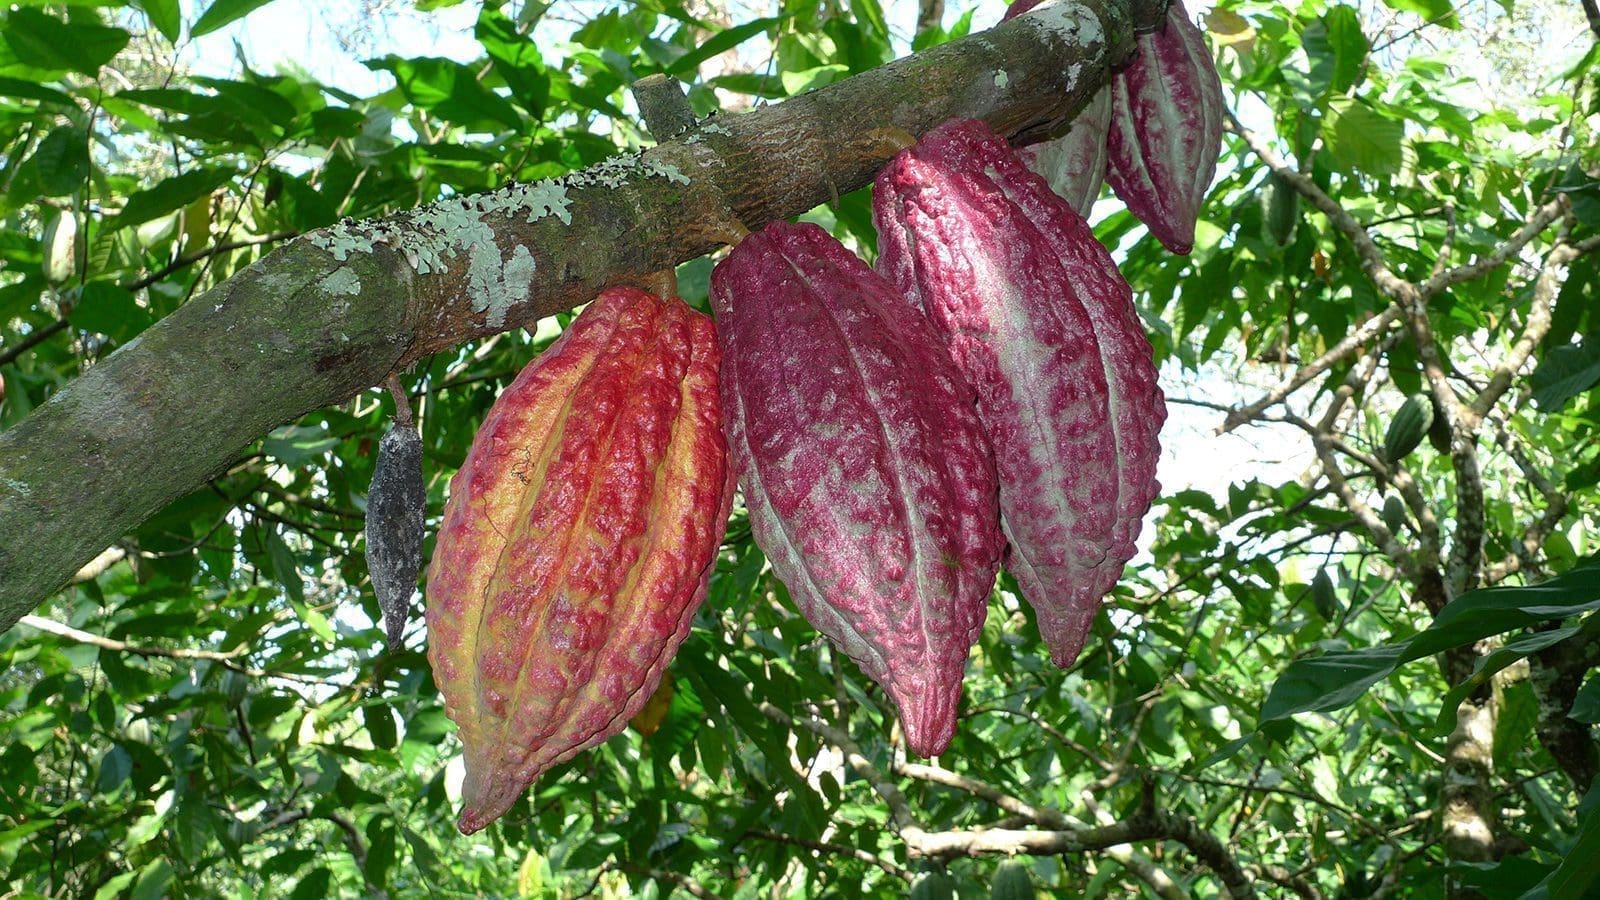 USDA, Lutheran World Relief partner in new US$22m project aimed at improving Nigeria’s cocoa value chain